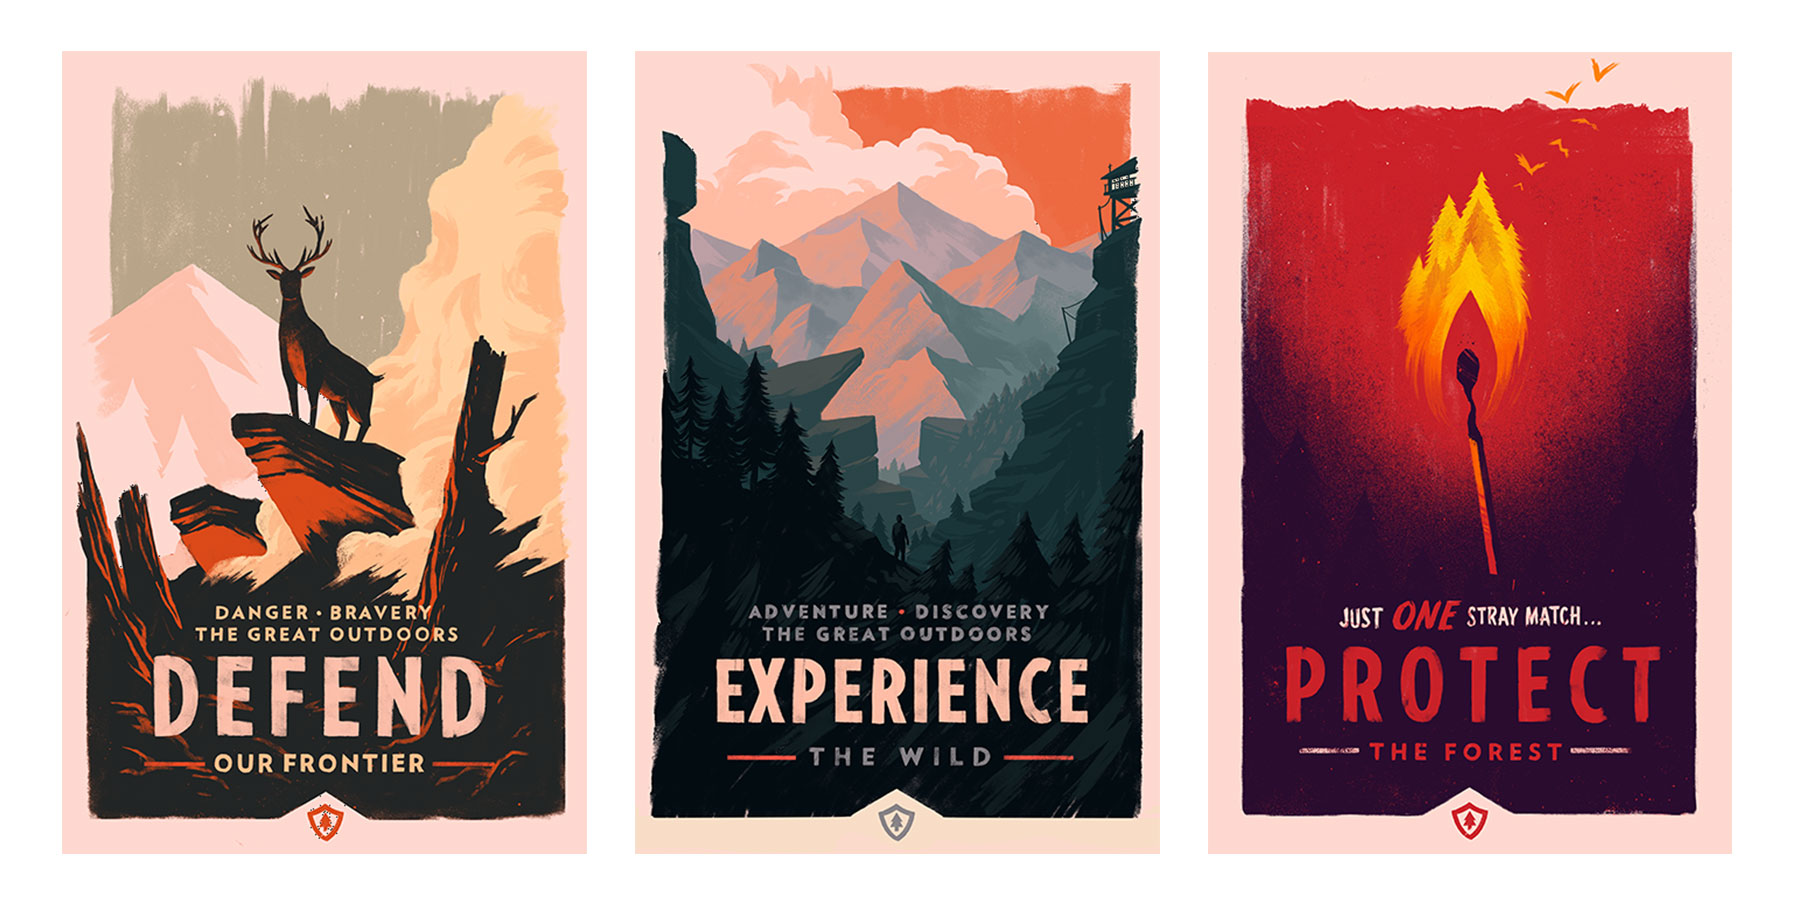 Firewatch posters